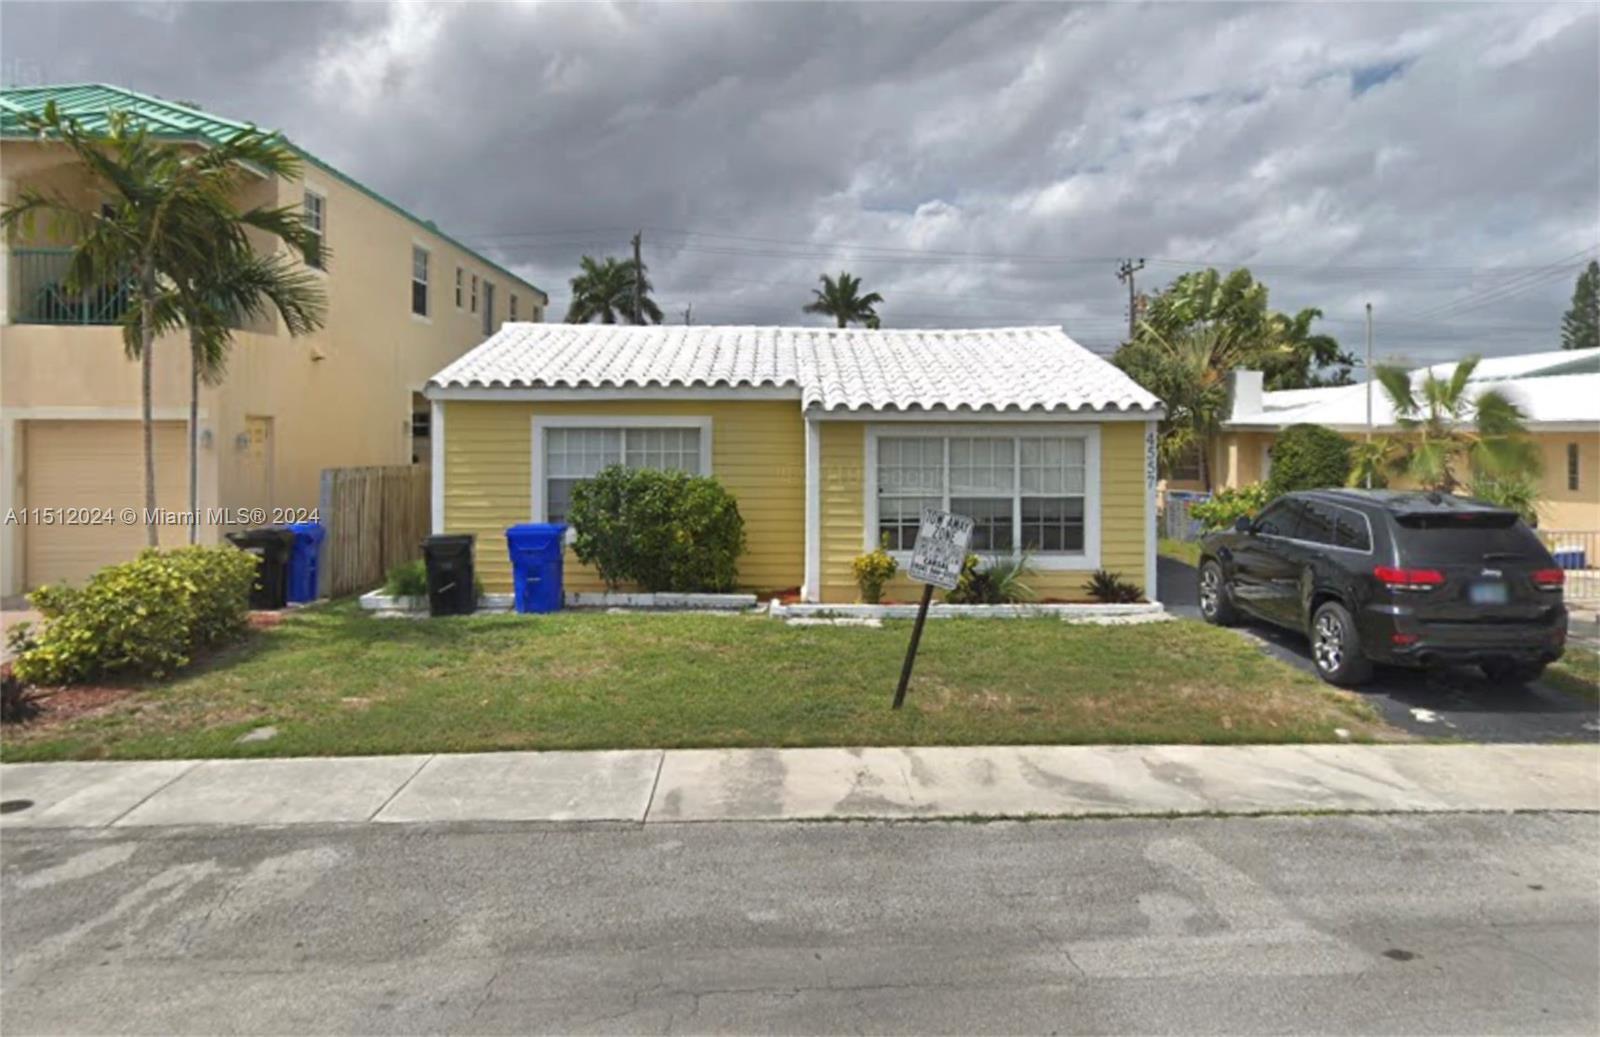 Photo of 4557 Poinciana St in Lauderdale By The Sea, FL